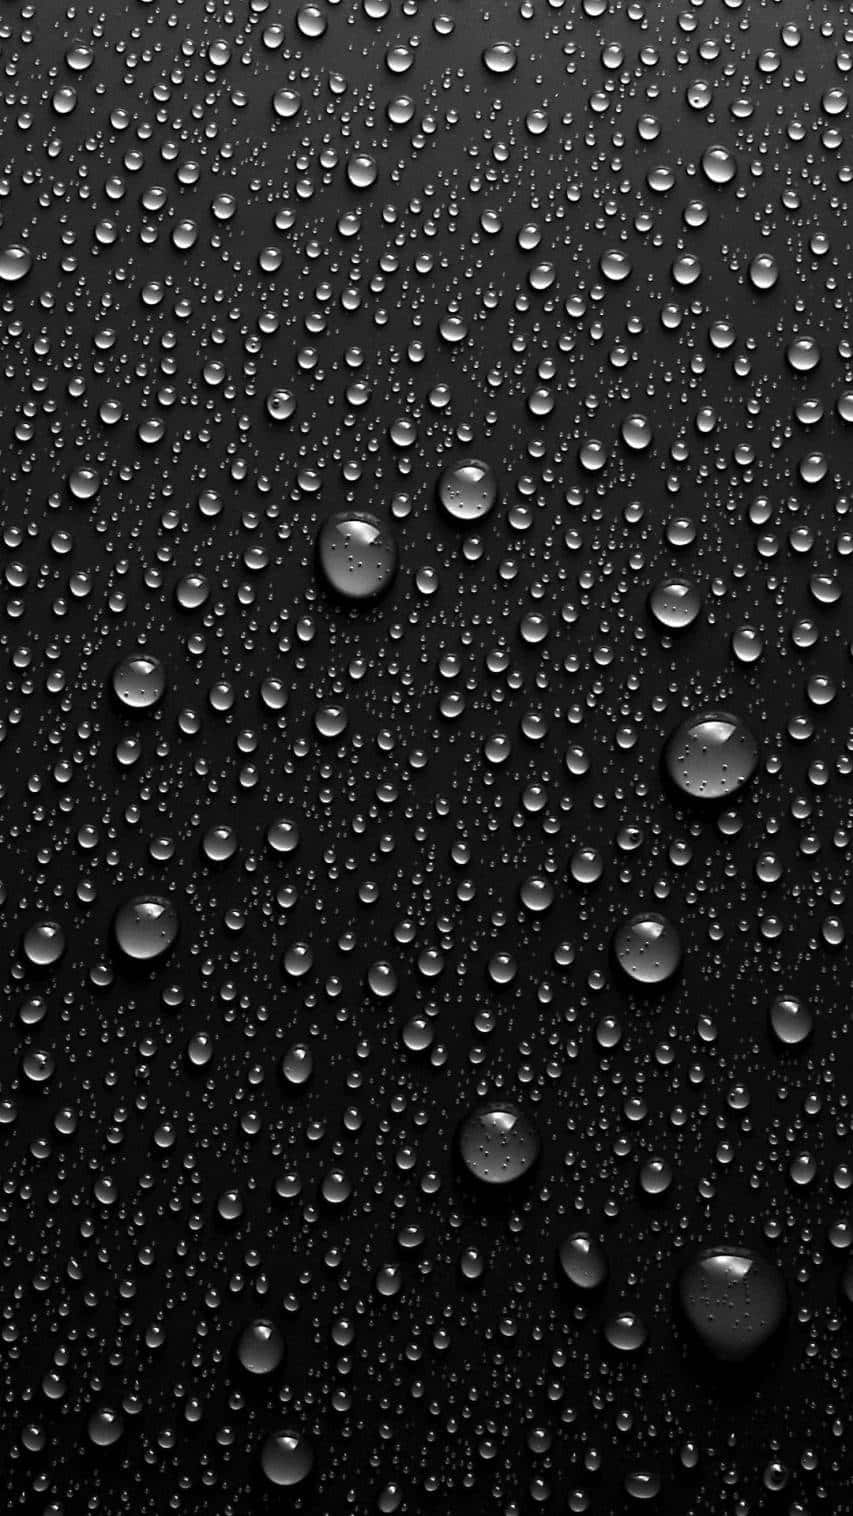 Water Drops On A Black Background Wallpaper